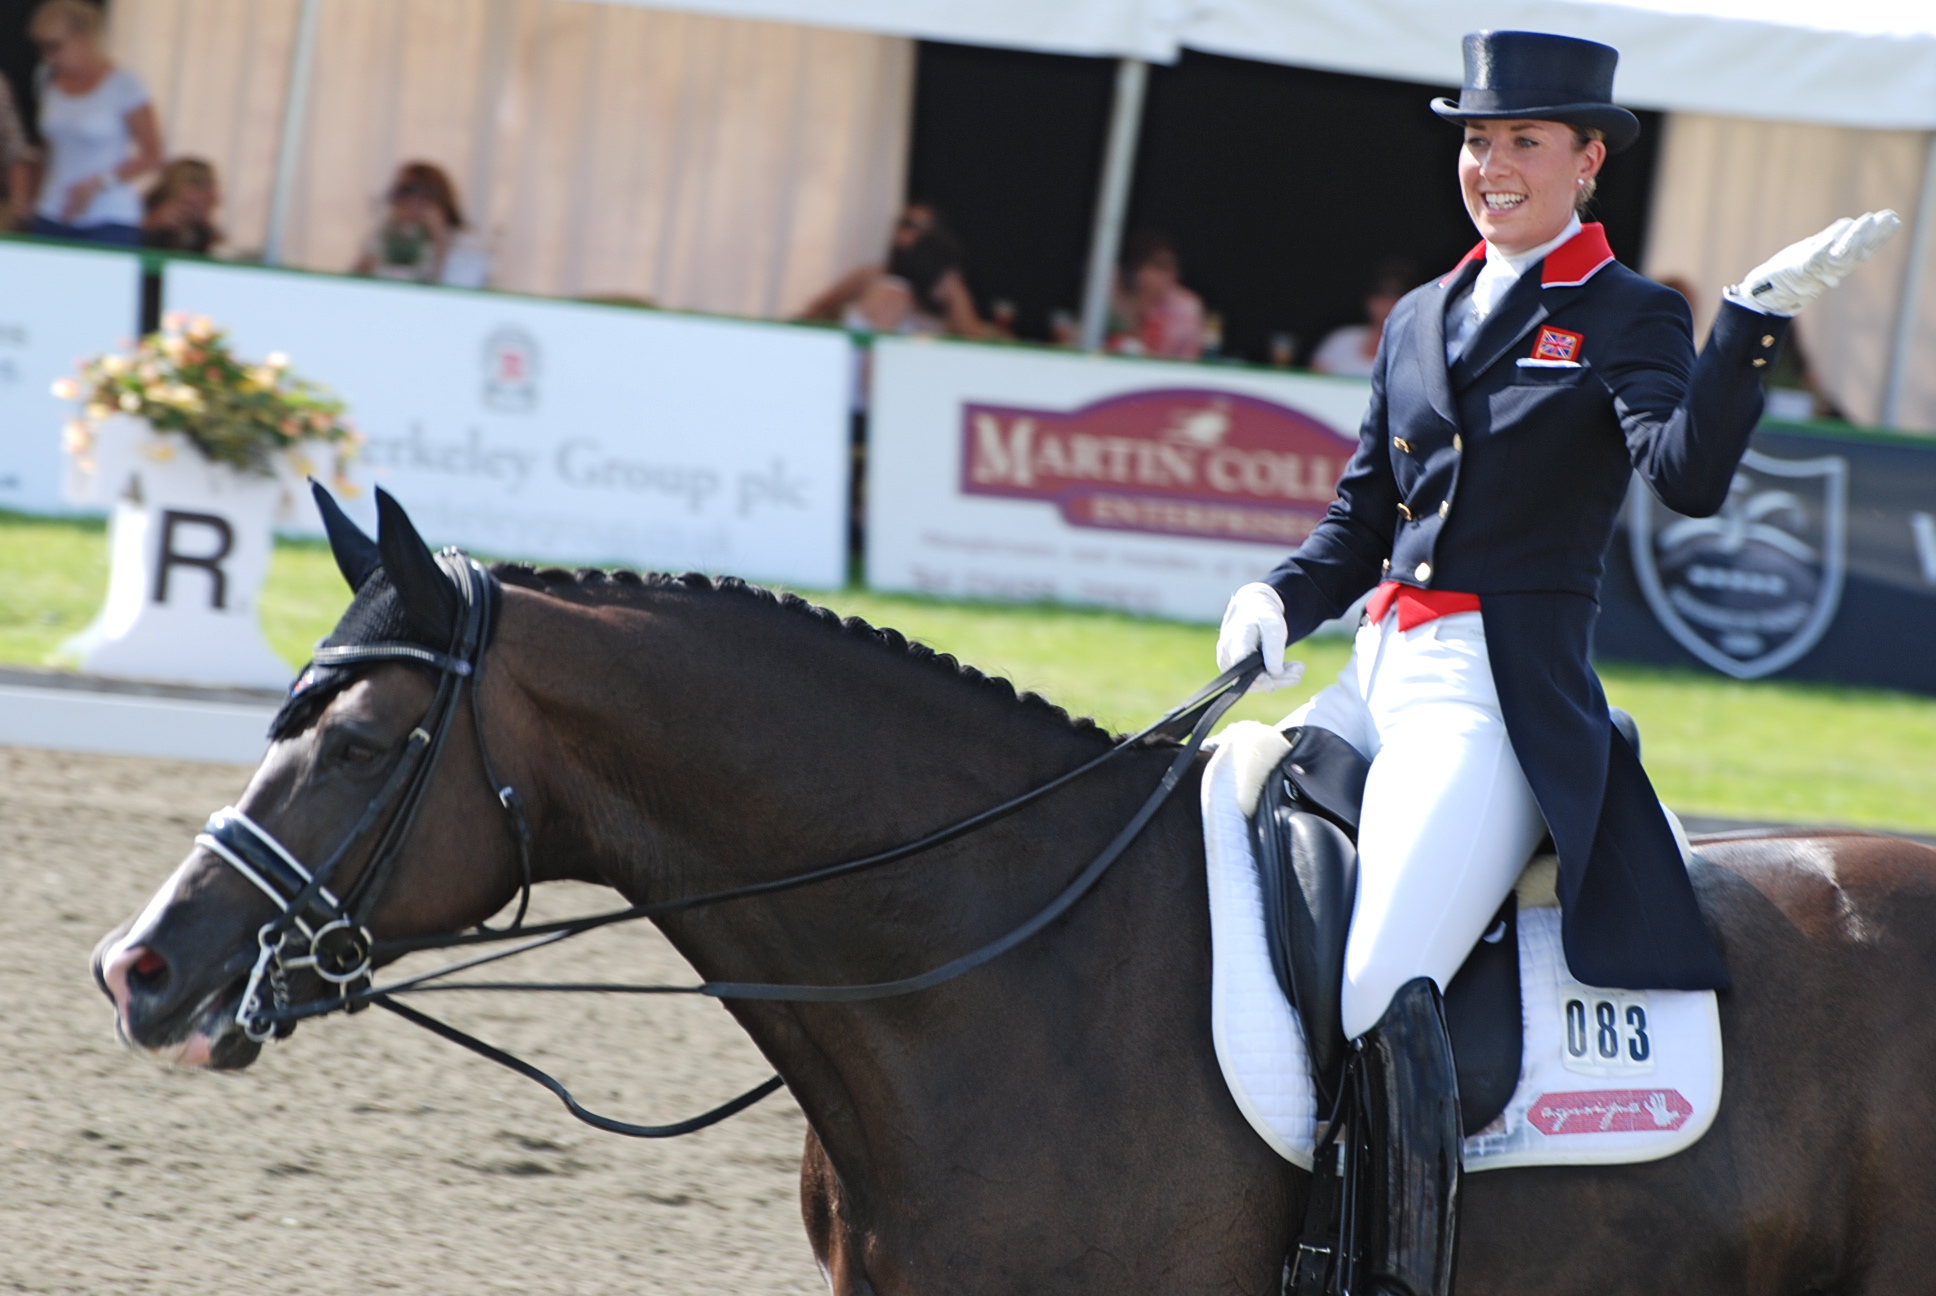 Charlotte Dujardin and Valegro, in a 2011 image by Judy Sharrock. Used with Creative Commons License Attribution-NoDerivs 2.0 Generic (CC BY-ND 2.0)